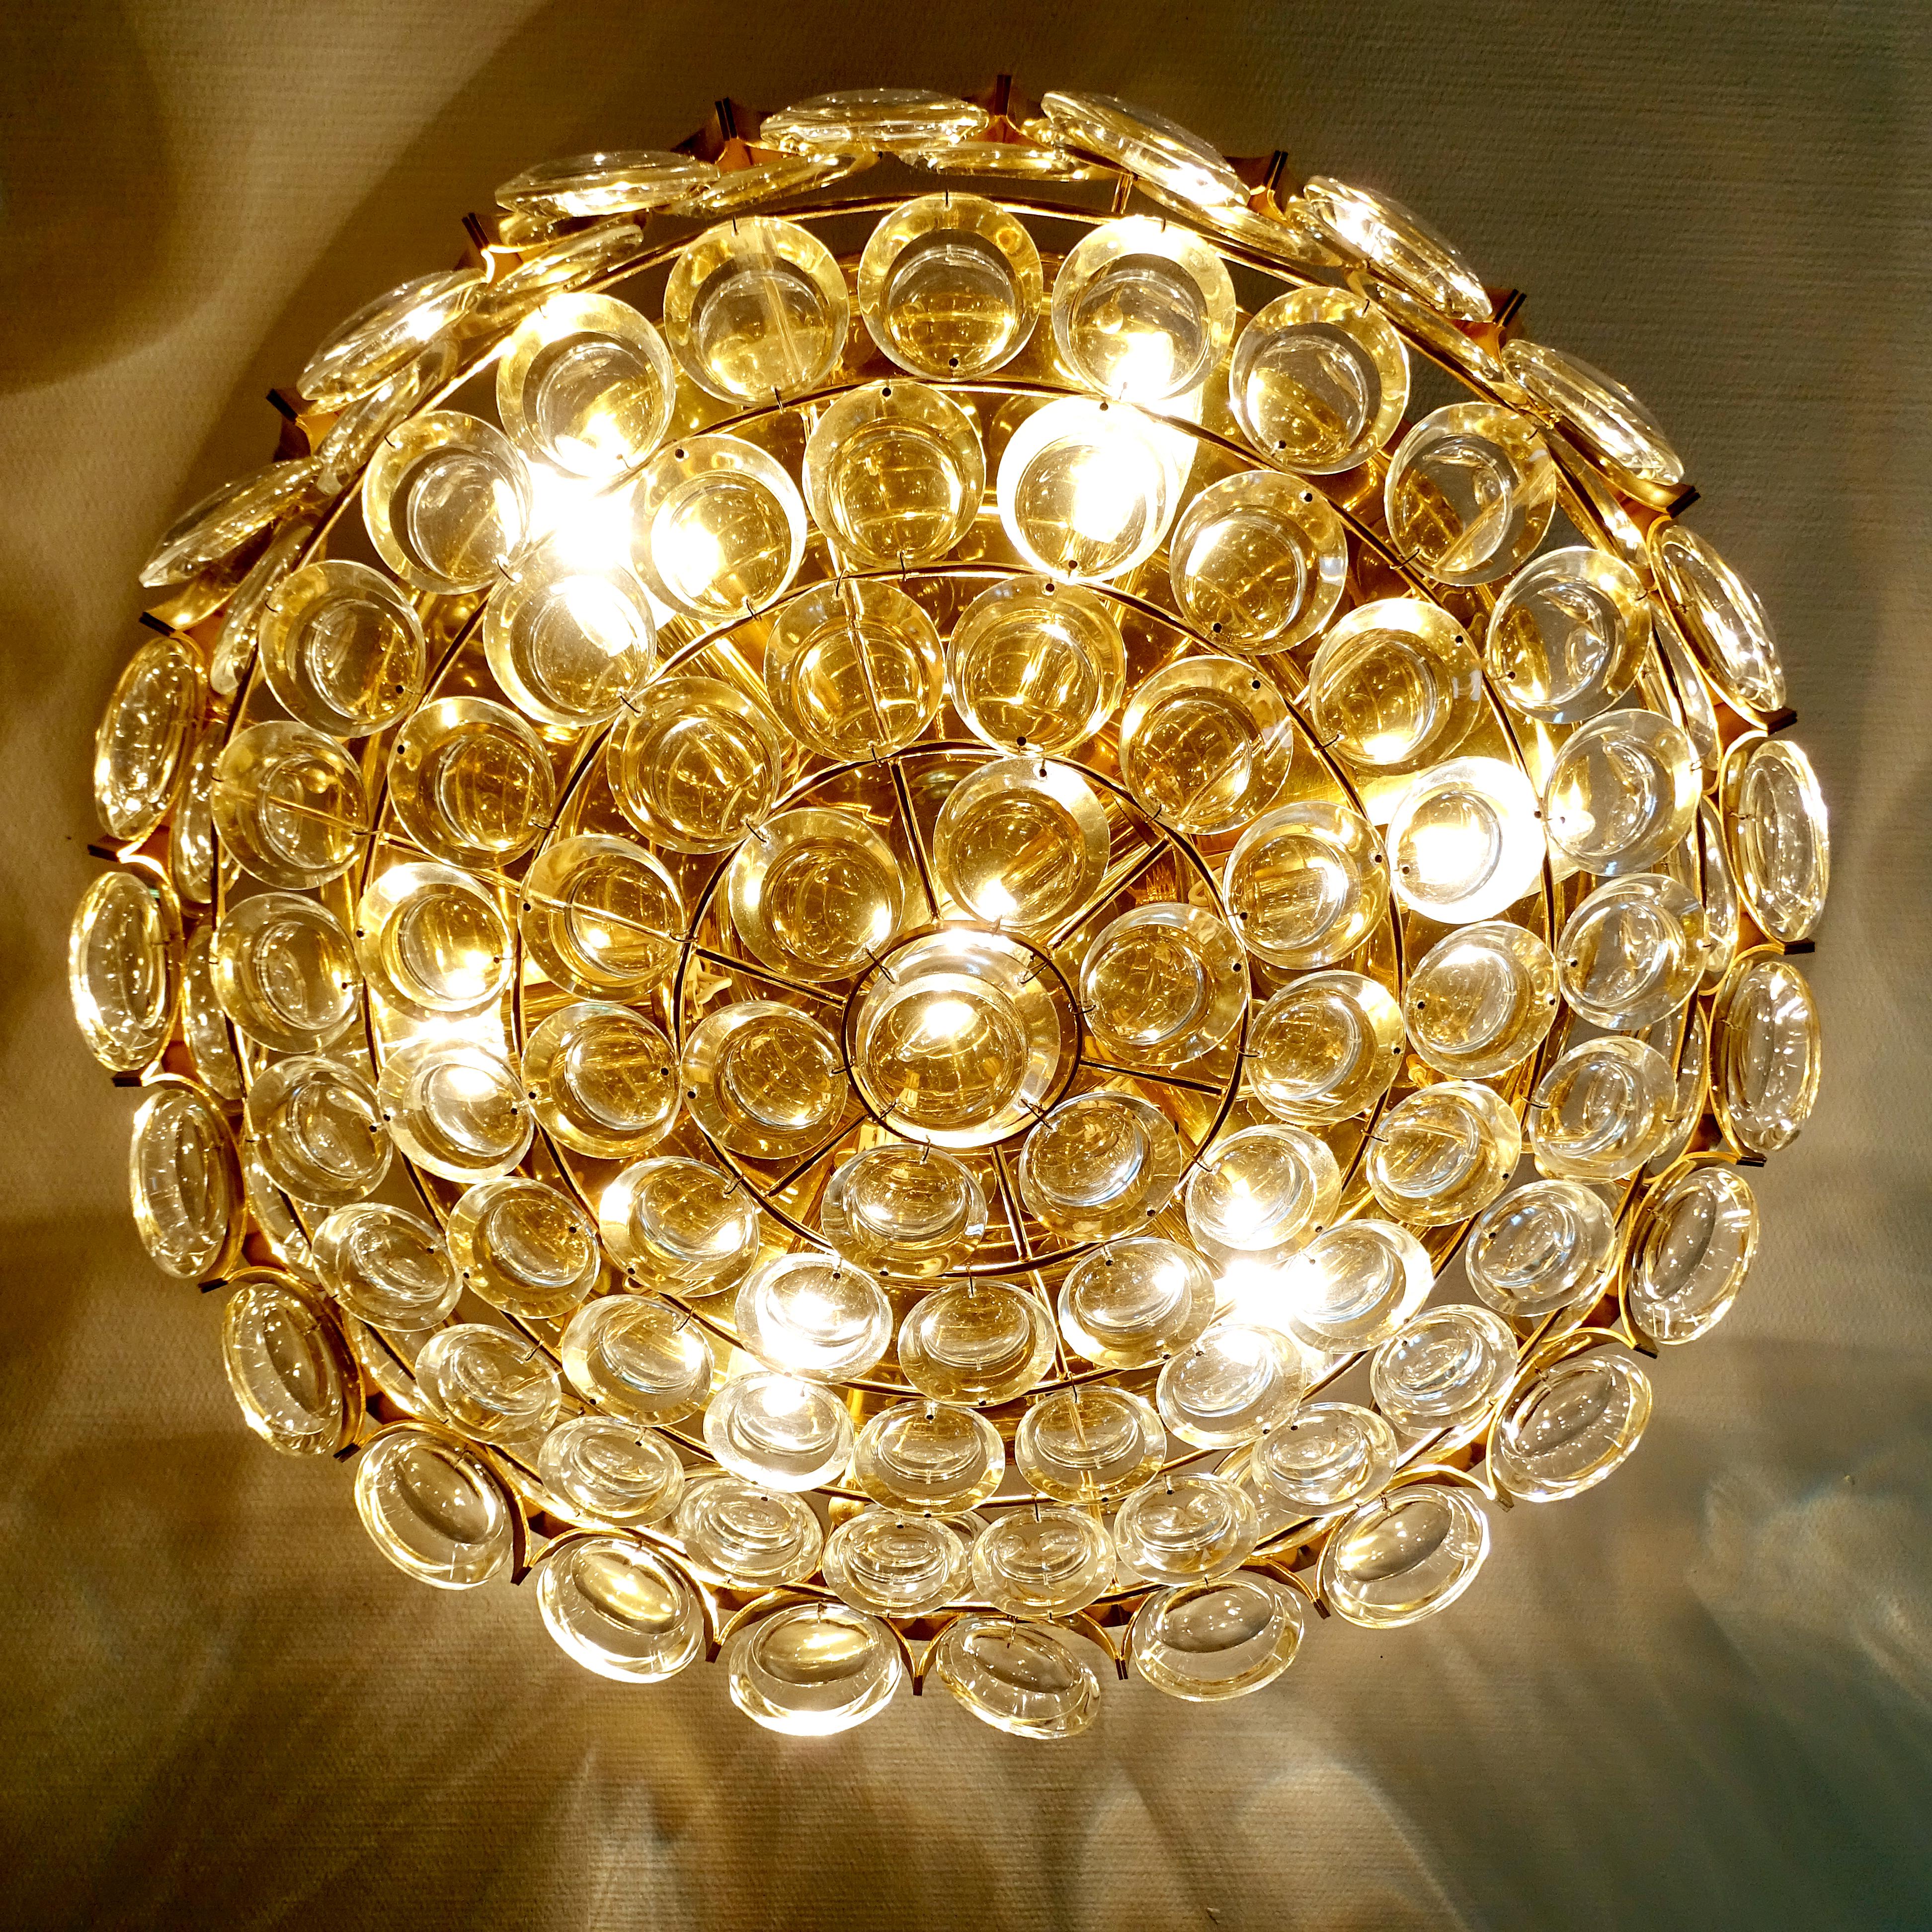 Mid-Century ceiling  fixture by Palwa. Palwa (which stands for Palme & Walter) is the oldest german lighting company  dating from the late 18th Century , The Light features a large brass circular base with 6 rows of crystal arranged in circular